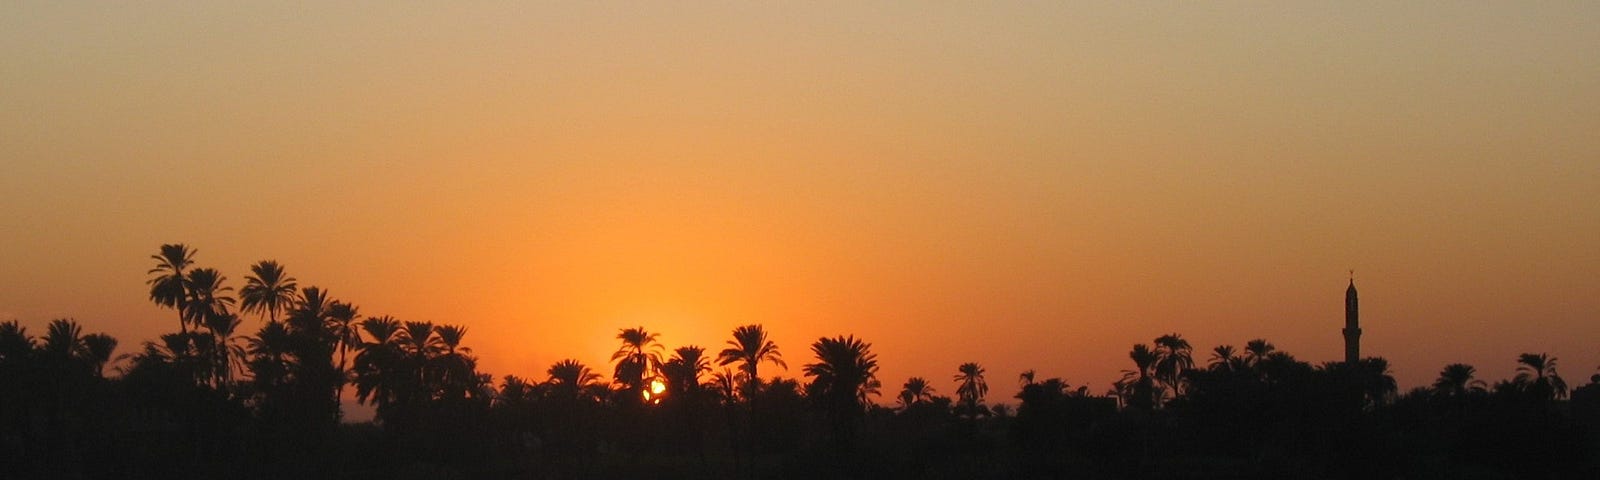 Setting sun behind silhouetted date palms, other trees and a mosque minaret, with the Nile river in the foreground